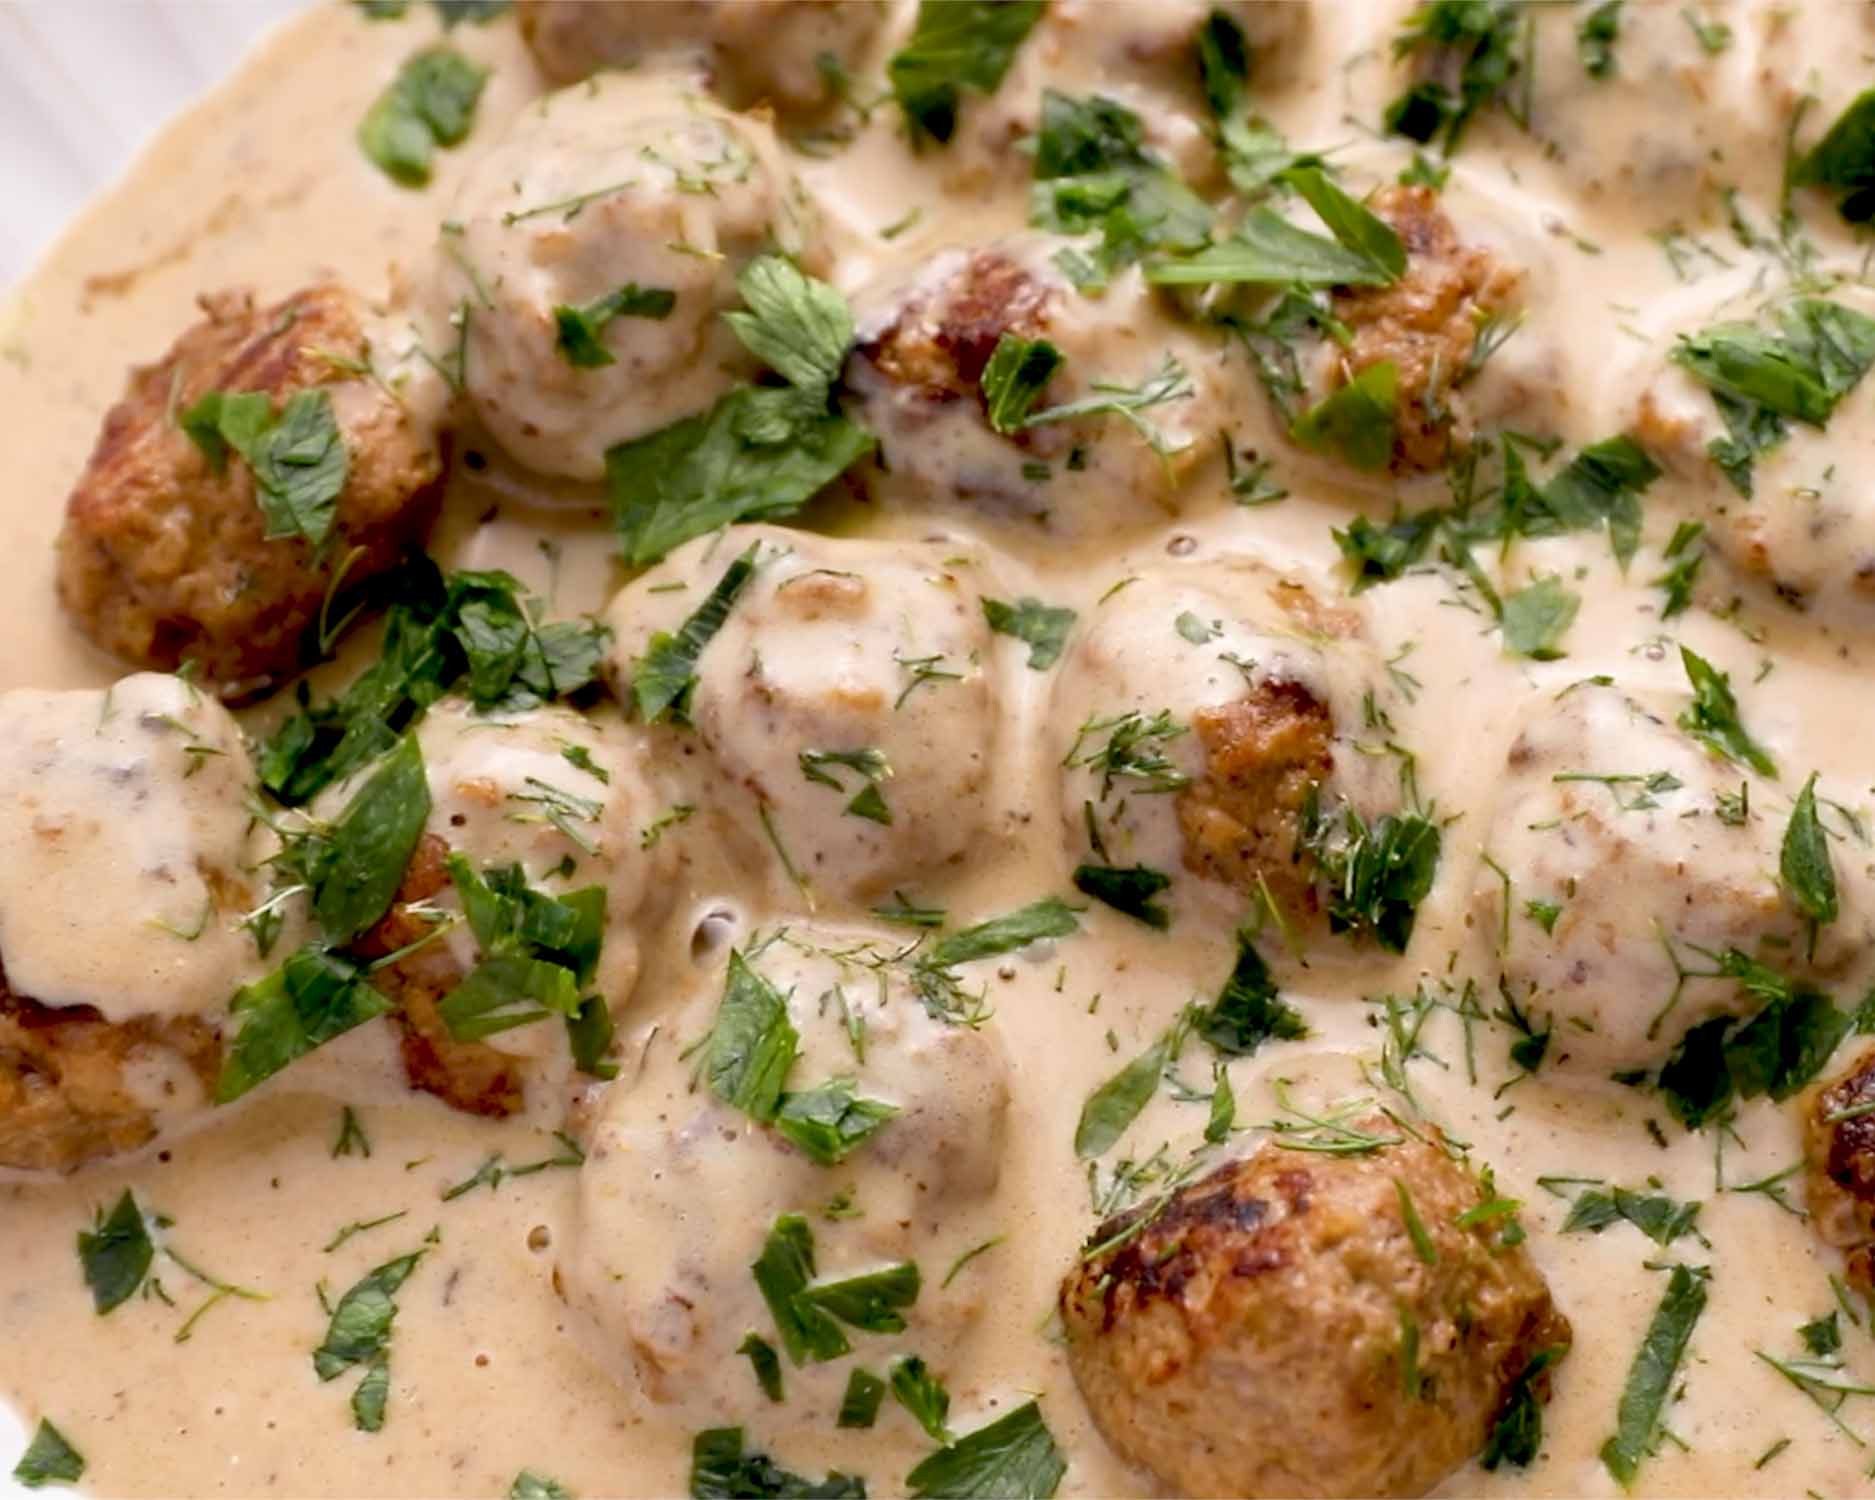 instant pot swedish meatballs in a serving platter garnished with dill and parsley.